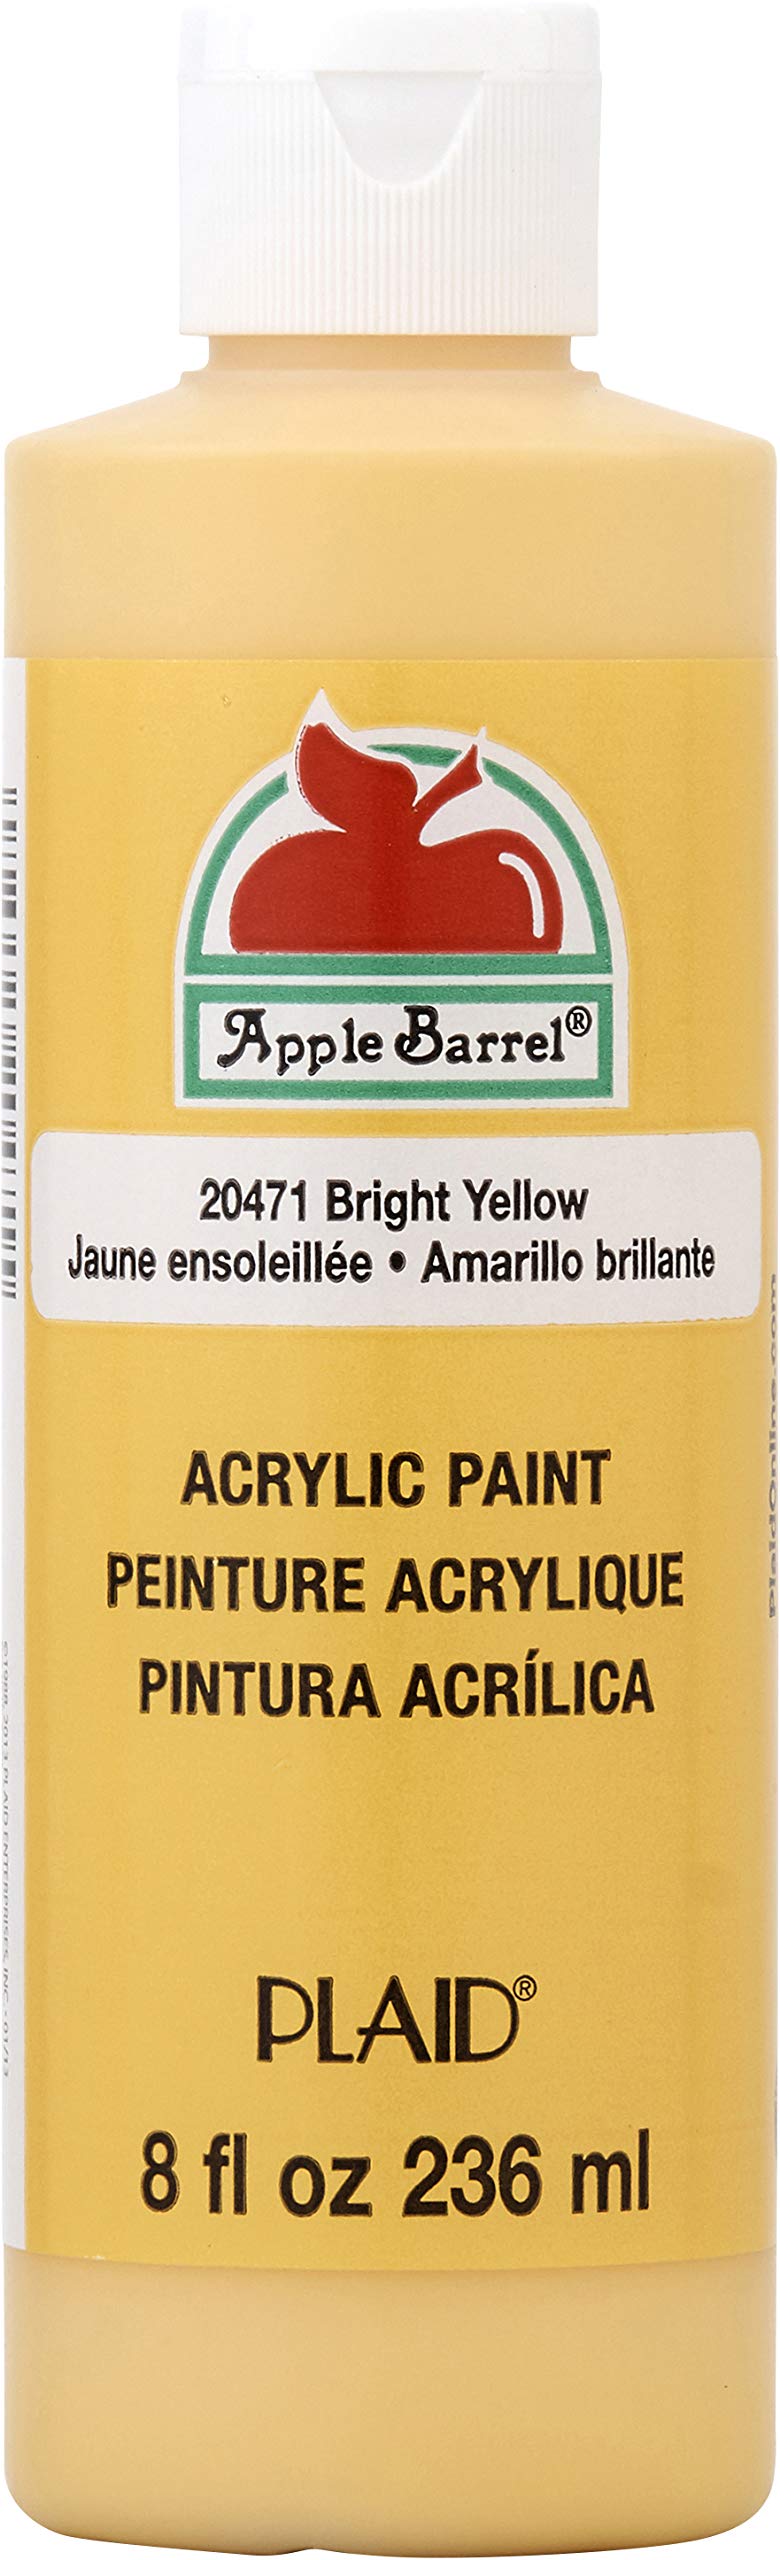 Apple Barrel Acrylic Paint in Assorted Colors (8 Ounce), 20471 Bright Yellow